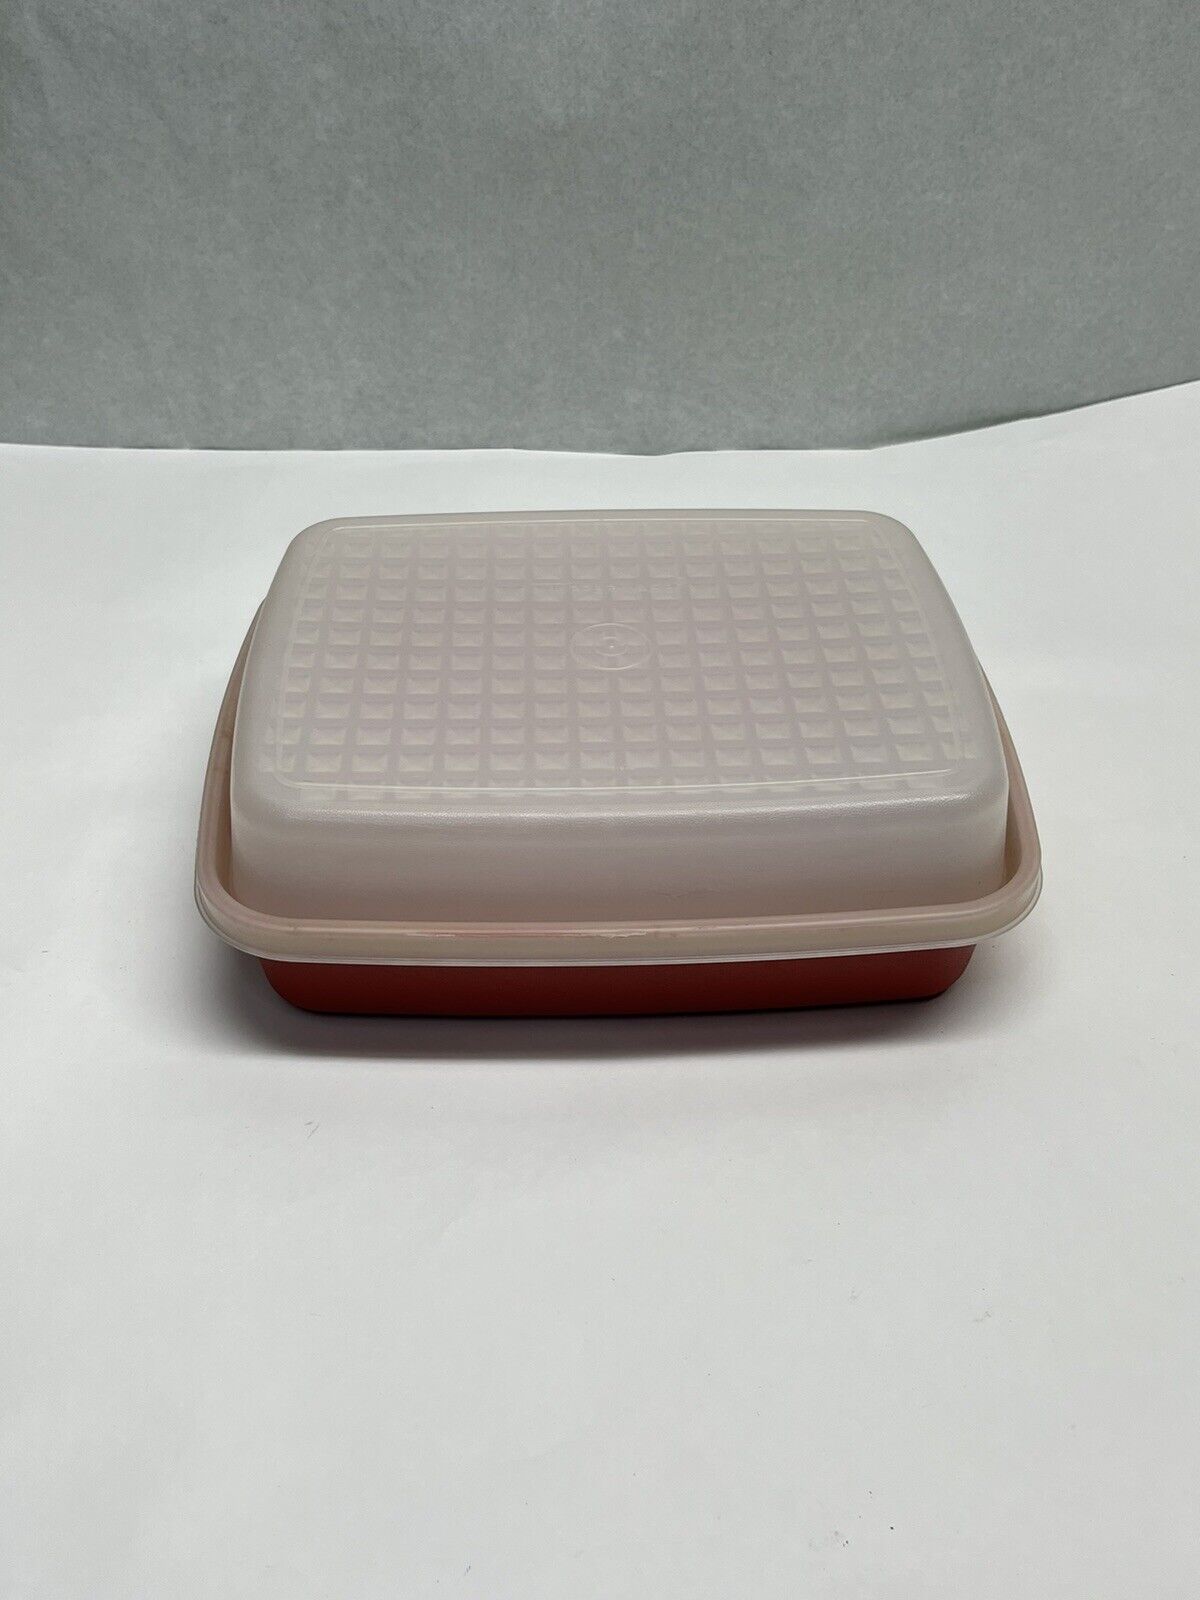 Vintage Tupperware Season Serve Meat Tray Marinade Container #1518-3 With Lid